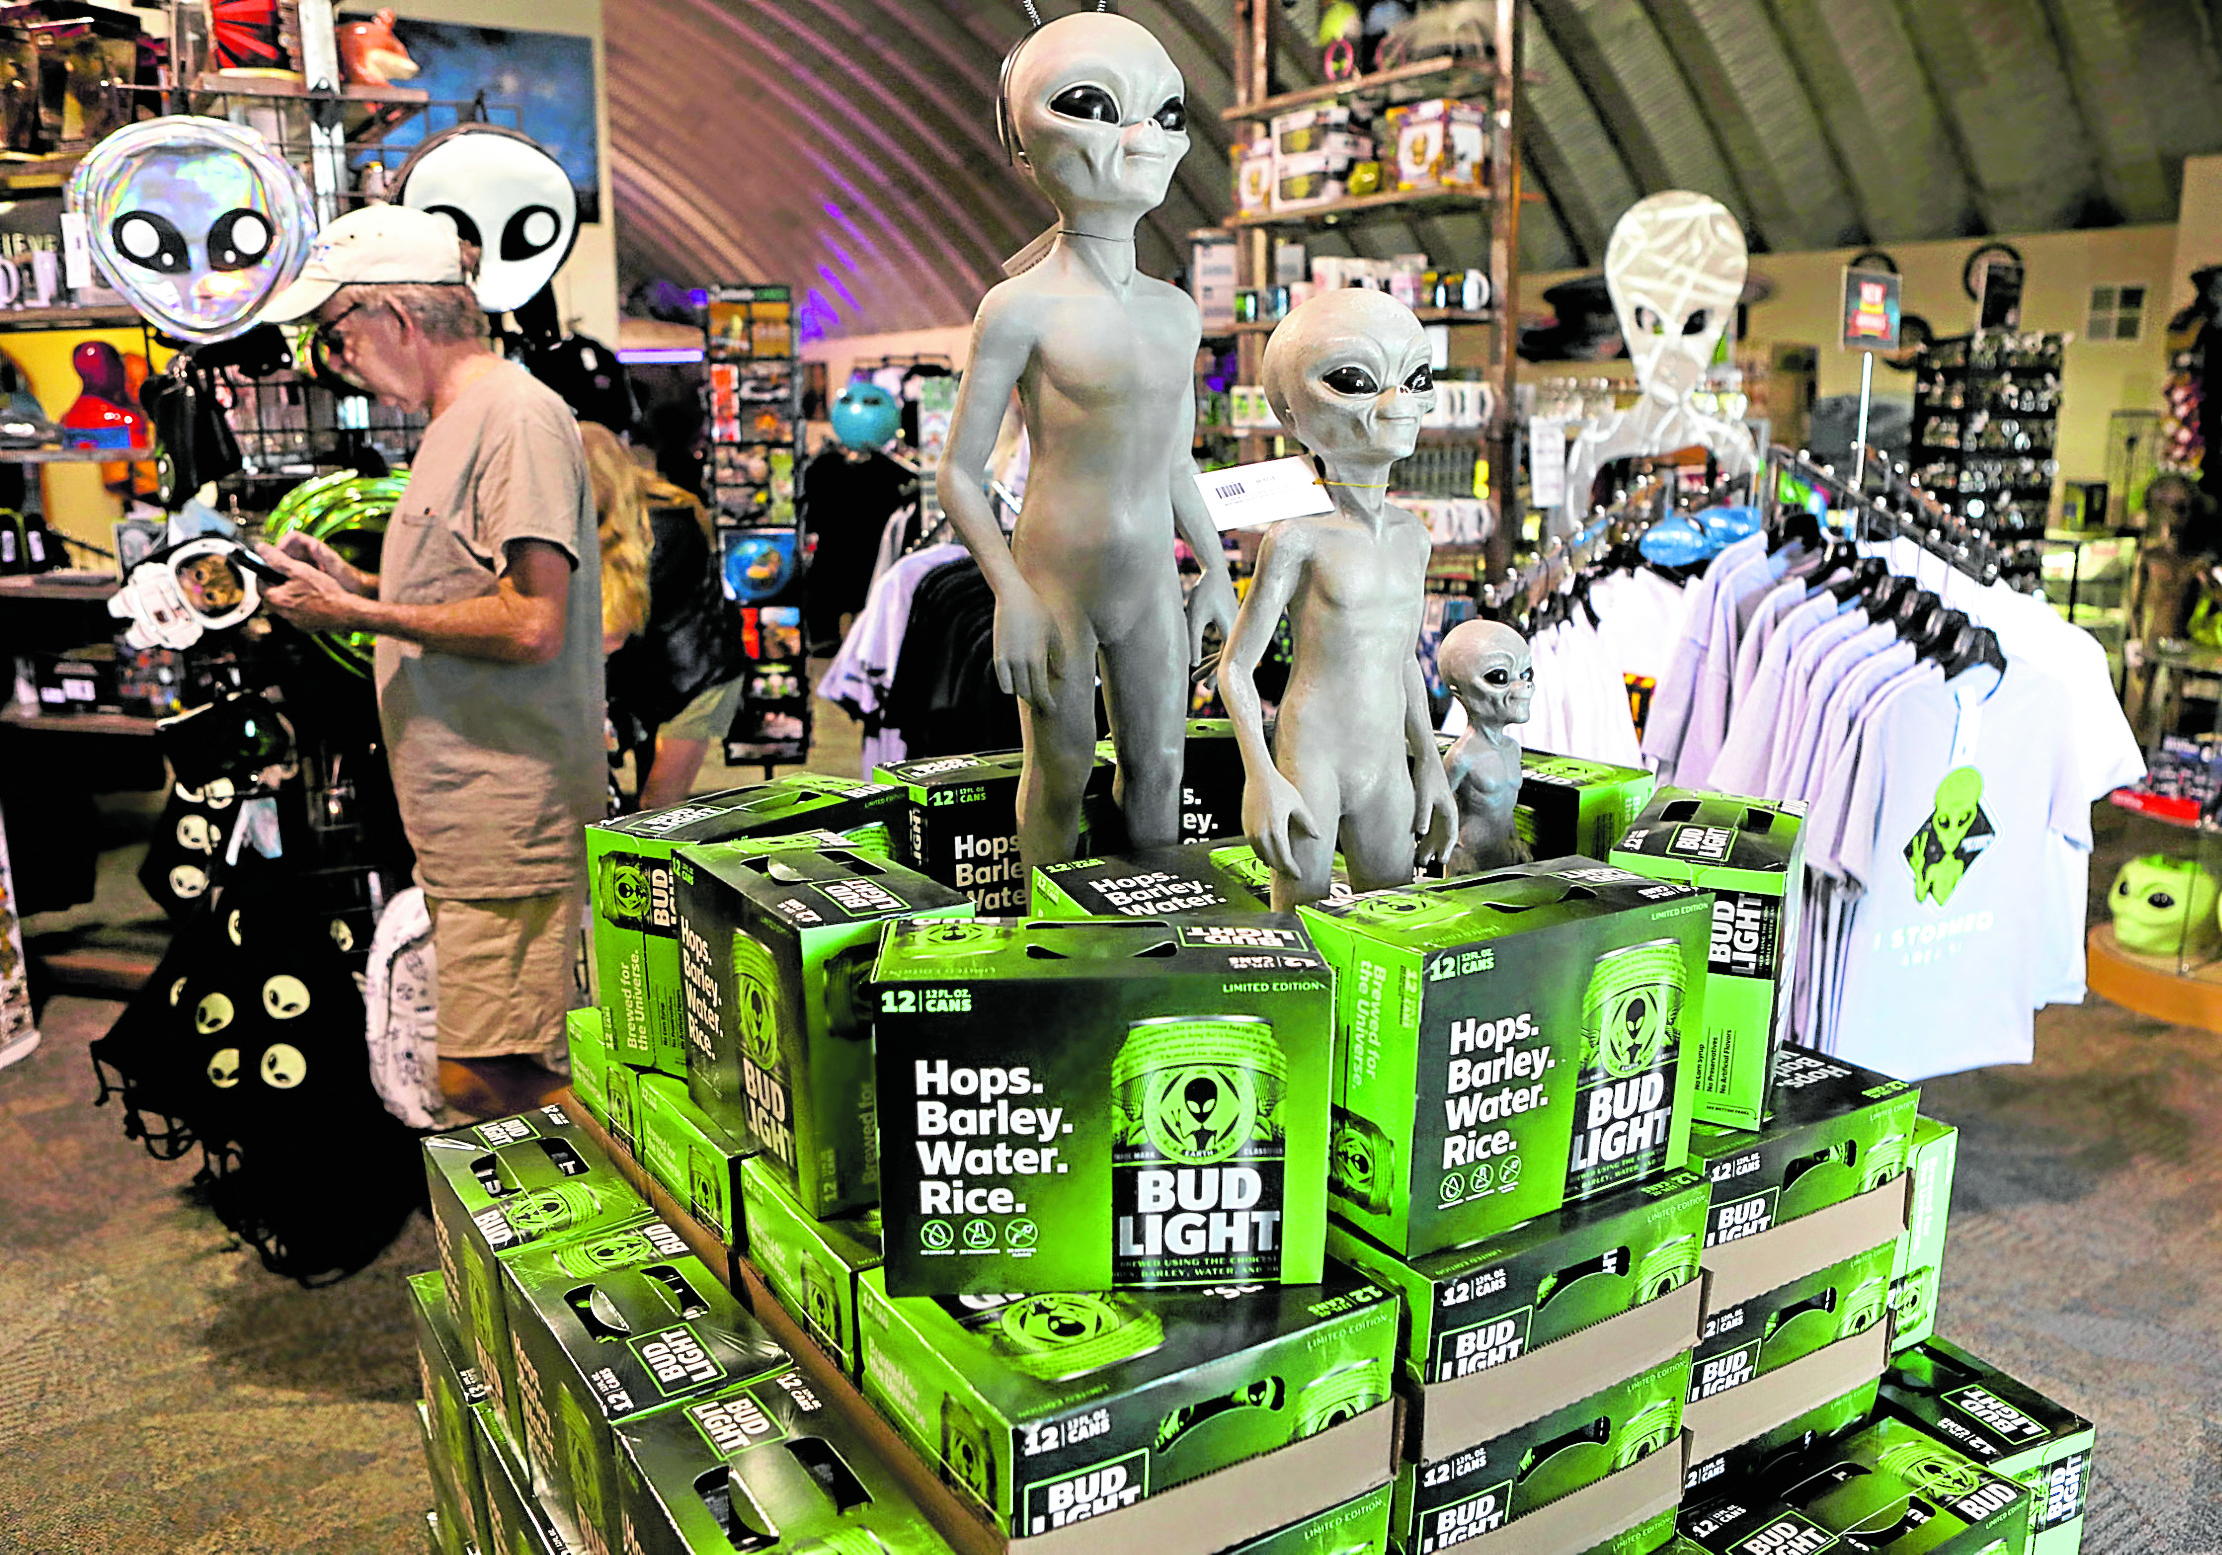 Boxes of alien-themed beer are on offer at a touristshop in Rachel, Nevada